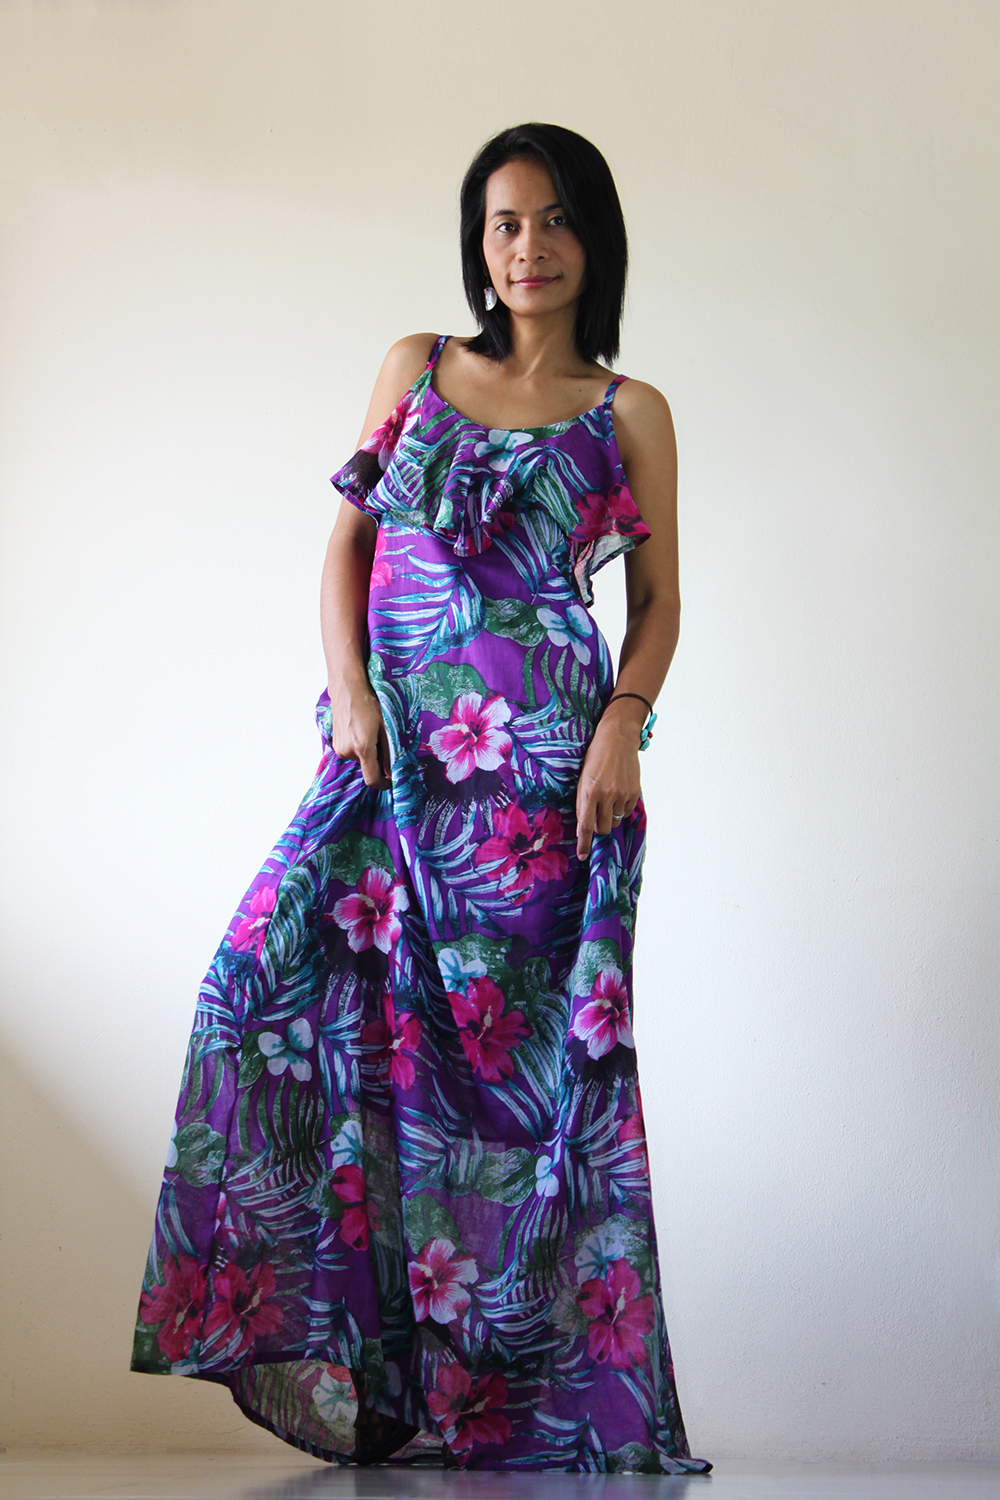 Floral Maxi Dress Bohemian Summer Gown : Sunny Dreams Collection on Luulla